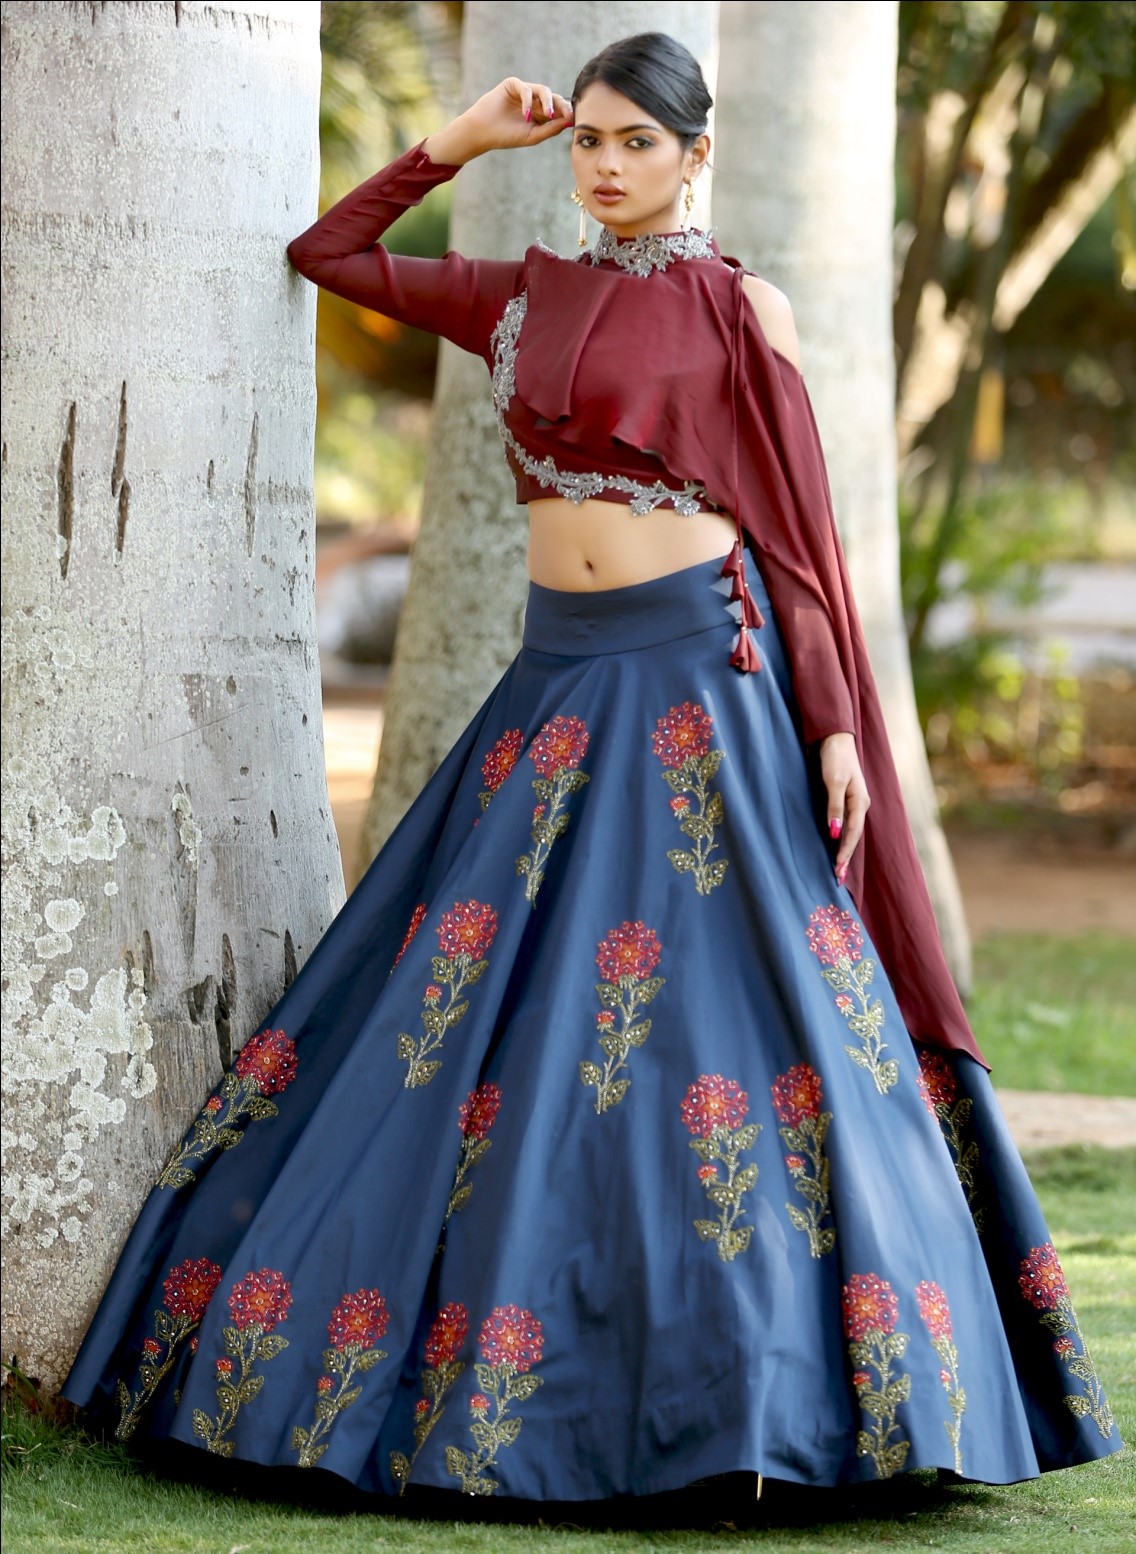 Latest Crap top lehenga launch to check out this season… Trend Spot from Samyakk